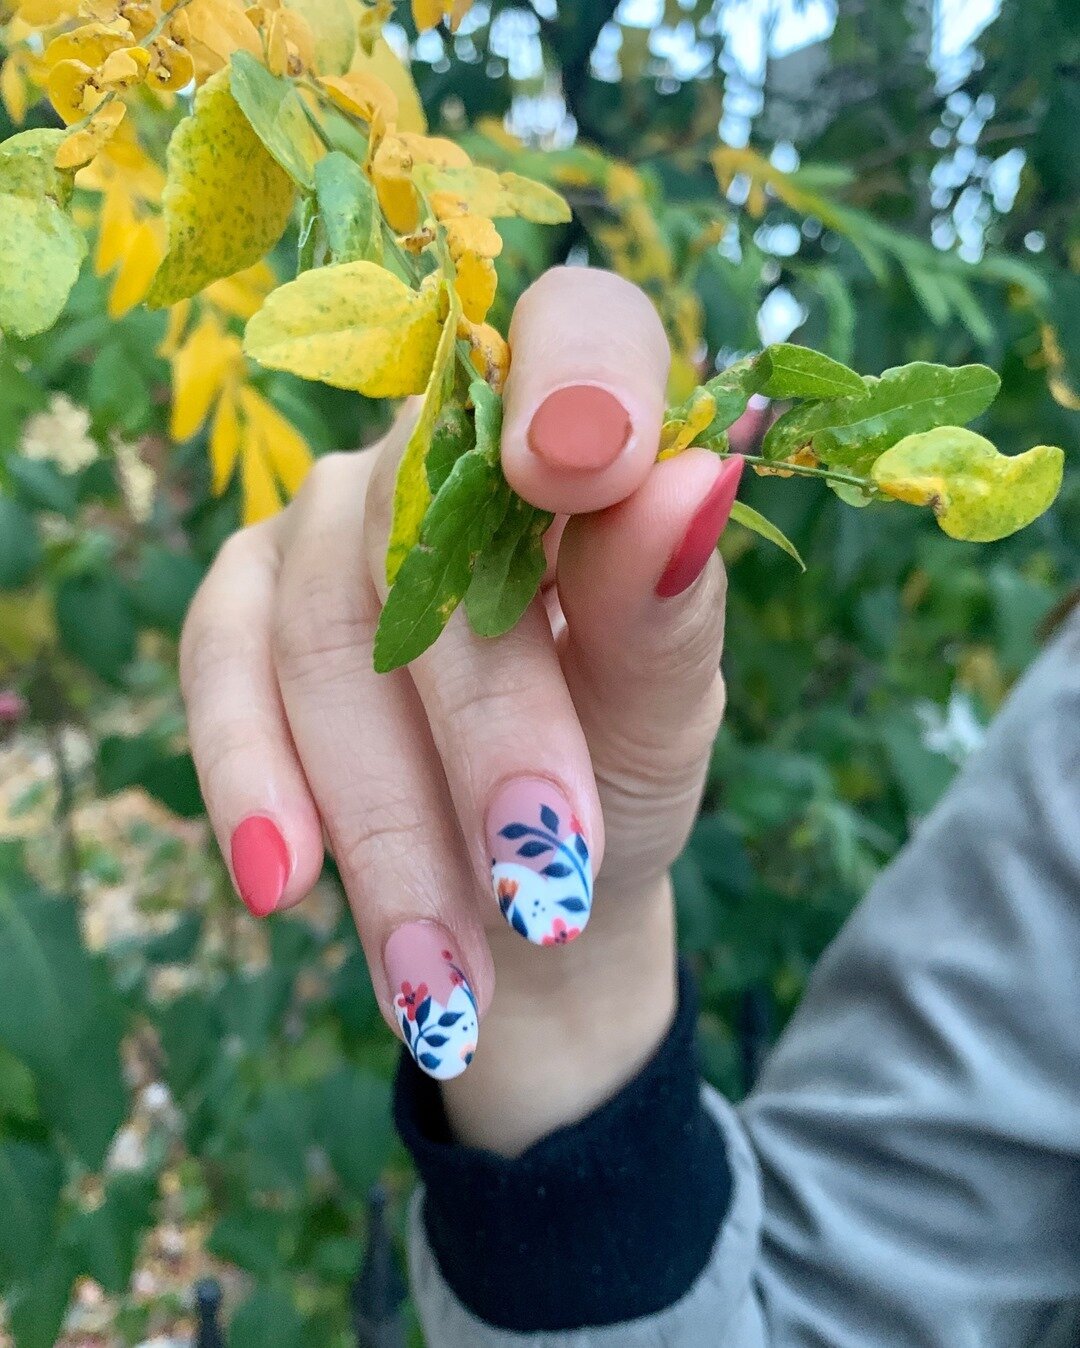 💅 🍁🍂TAG YOUR BESTIE below for a chance to WIN this manicure for both of you! #twinning #autumn #nailart⠀⠀⠀⠀⠀⠀⠀⠀⠀

Two separate winners will be selected. To qualify:
1) like this post 
2) you and your friend must be following @kukohouse 
⠀⠀⠀⠀⠀⠀⠀⠀⠀
